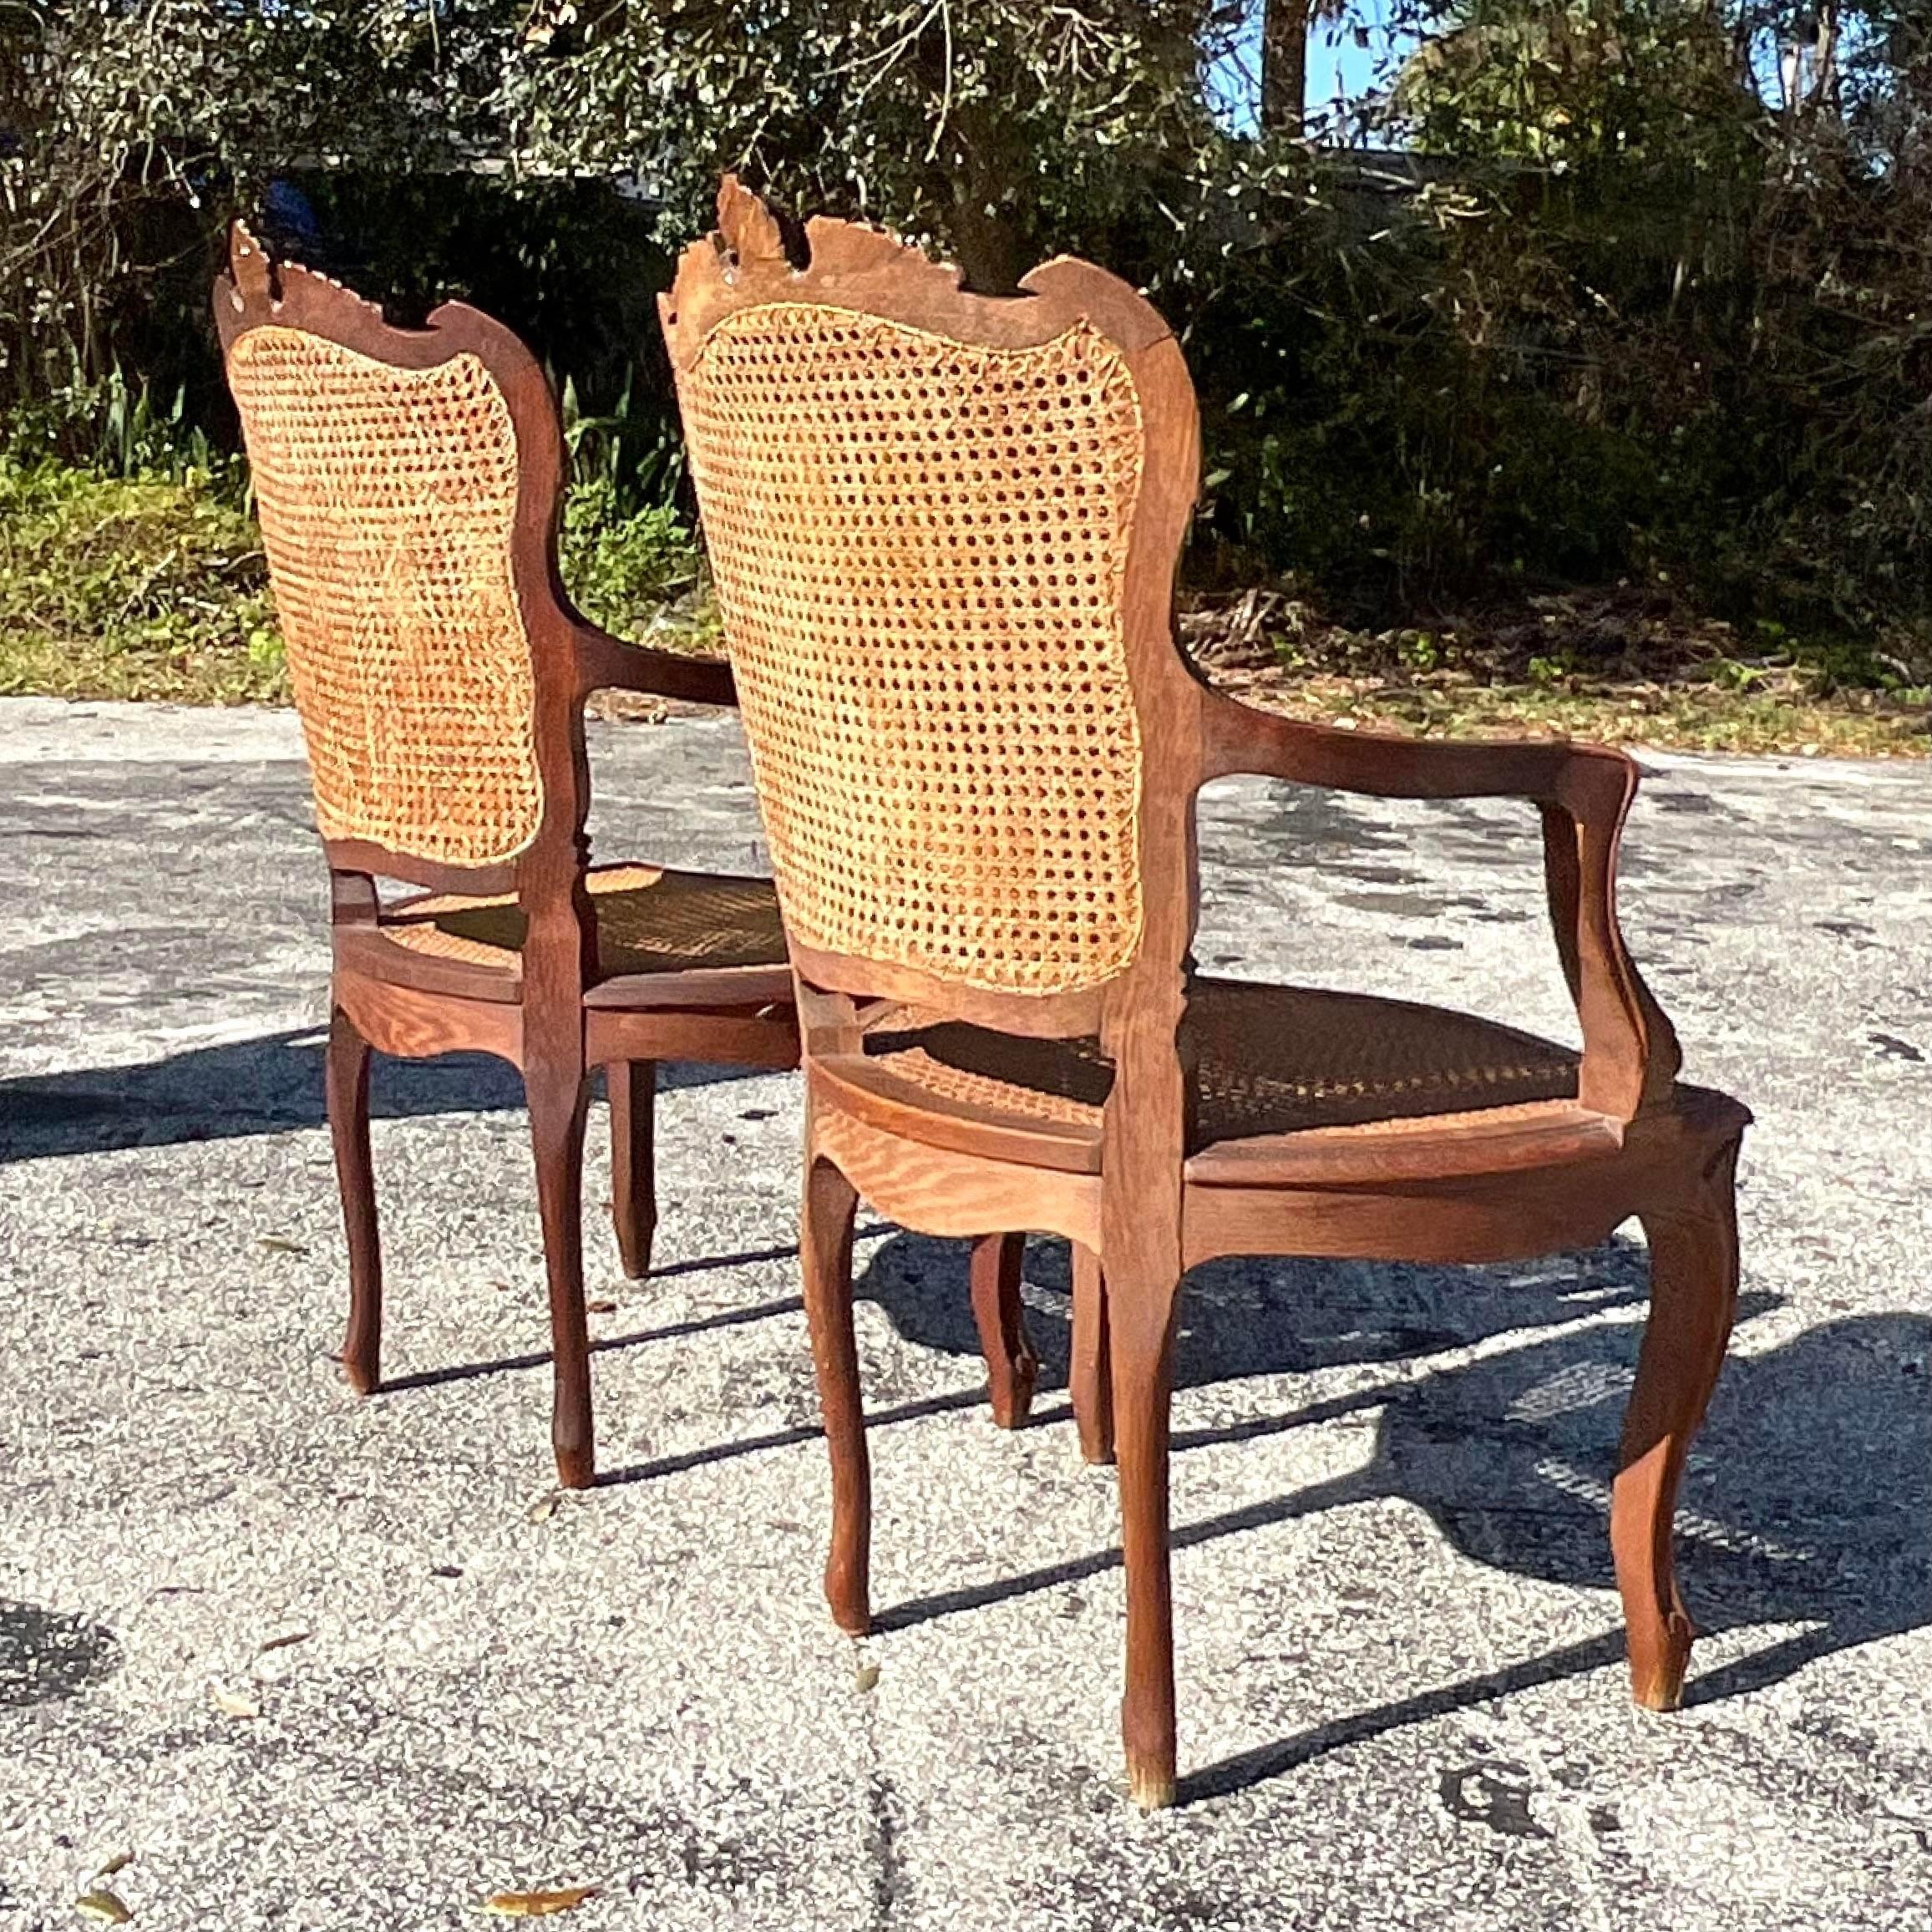 20th Century Vintage Boho Carved Wooden Chairs With Inset Cane Panels - a Pair For Sale